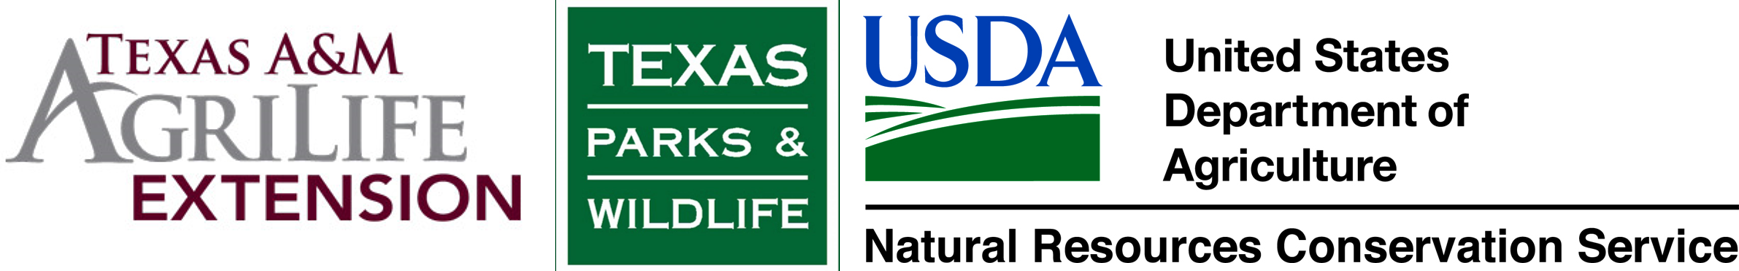 AgriLife Extension, Texas Parks & Wildlife, and Natural Resources Conservation Service Logos